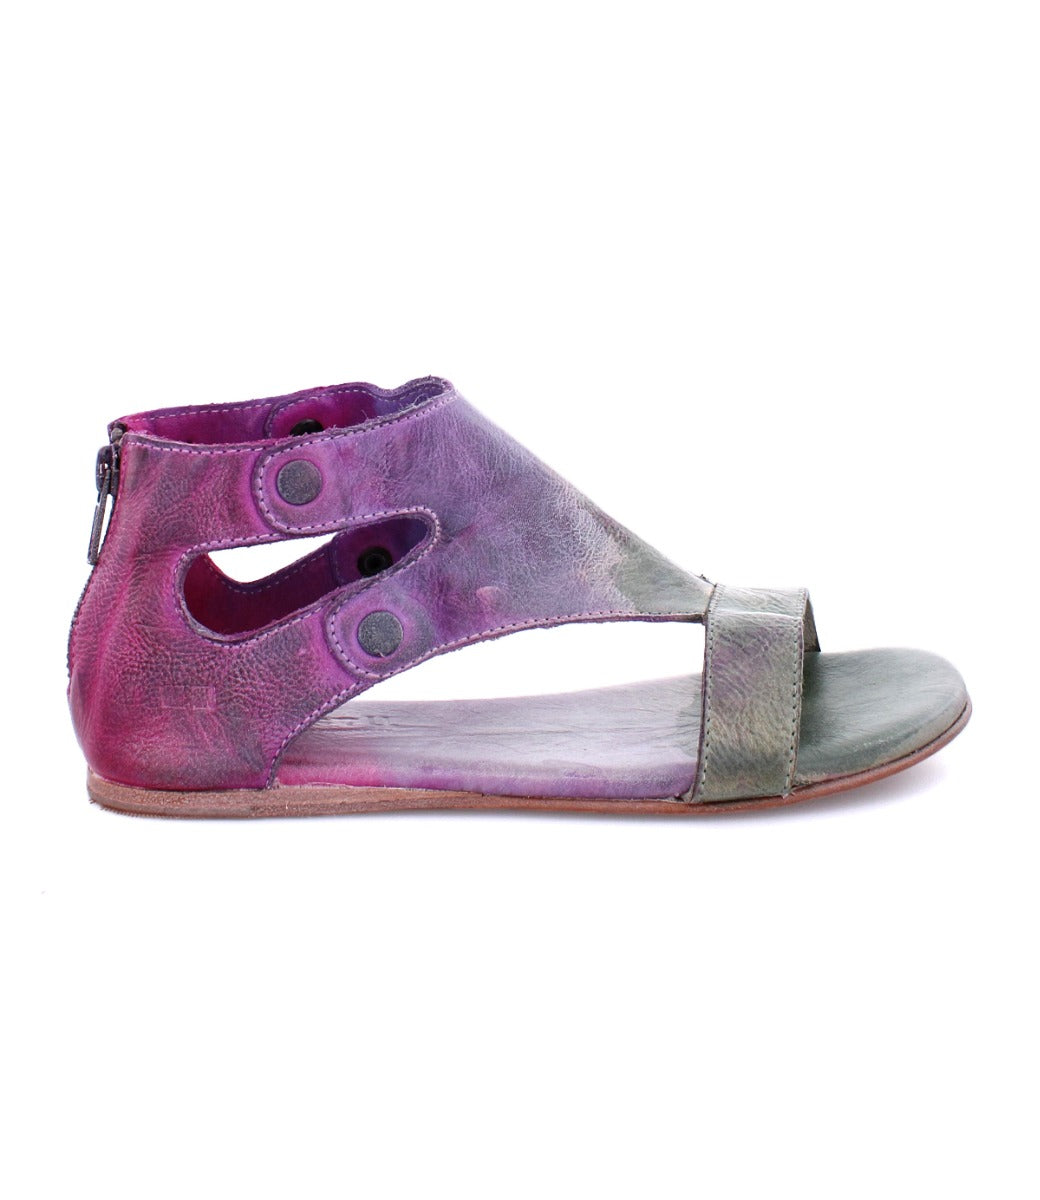 A pair of Bed Stu's Soto women's sandals in purple and pink.